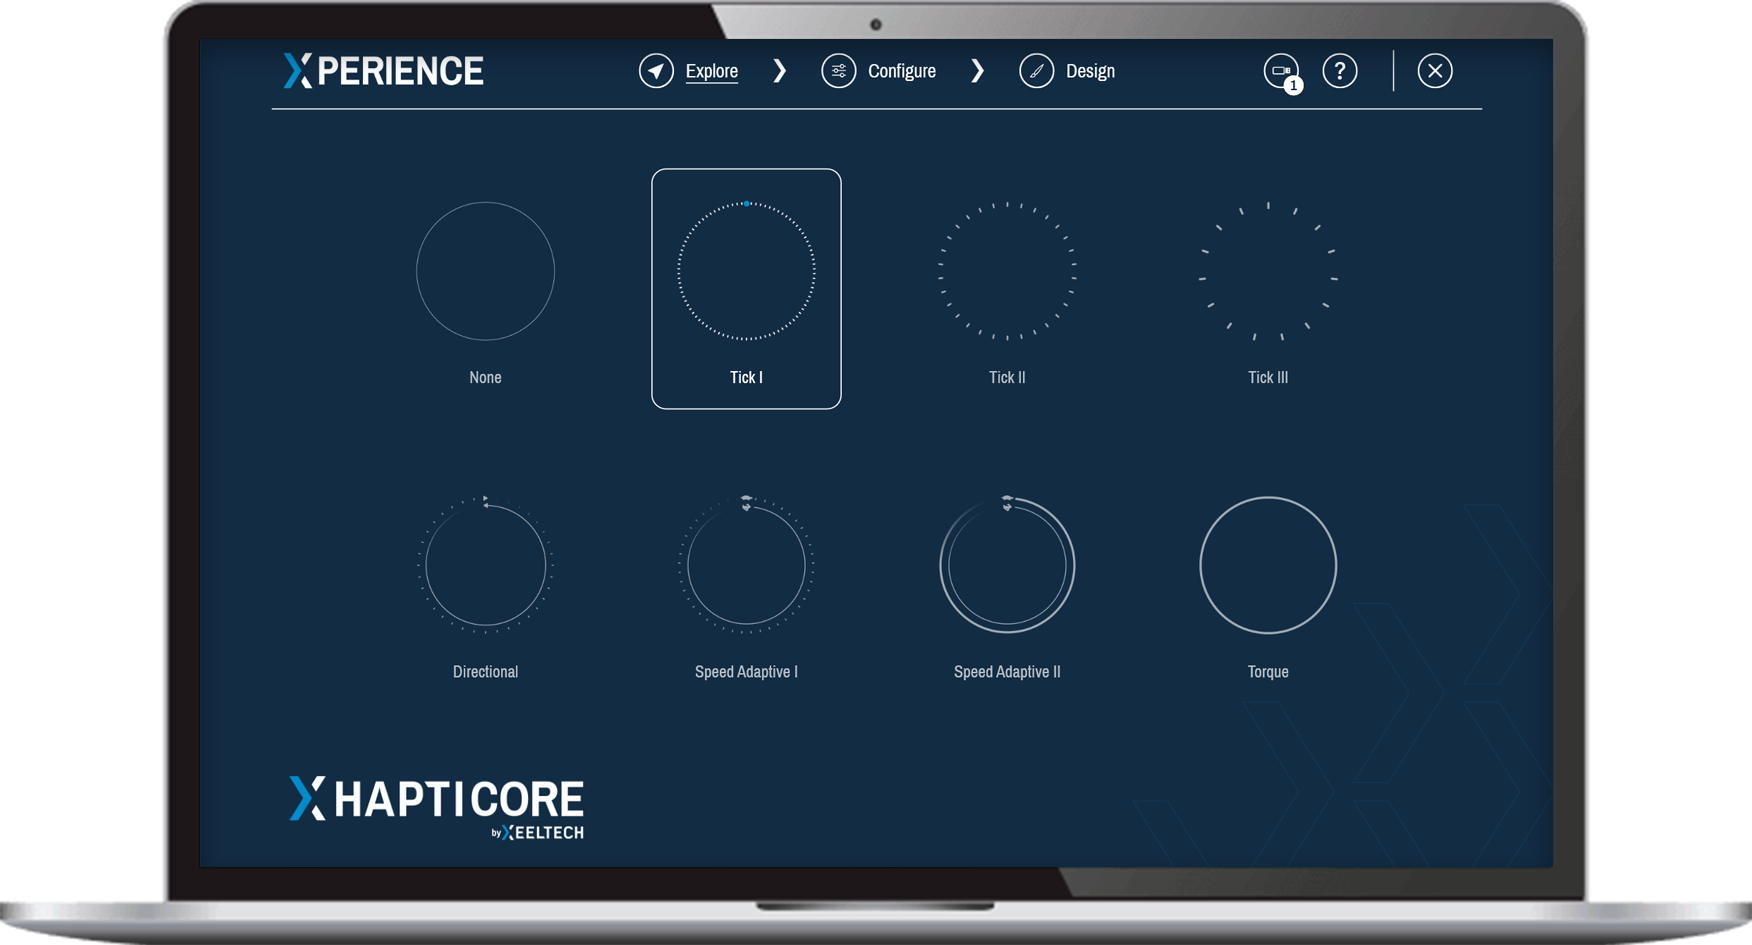 Notebook, running the HAPTICORE Xperience demonstration software to test various haptic feedback patterns with your rotary haptic actuator.